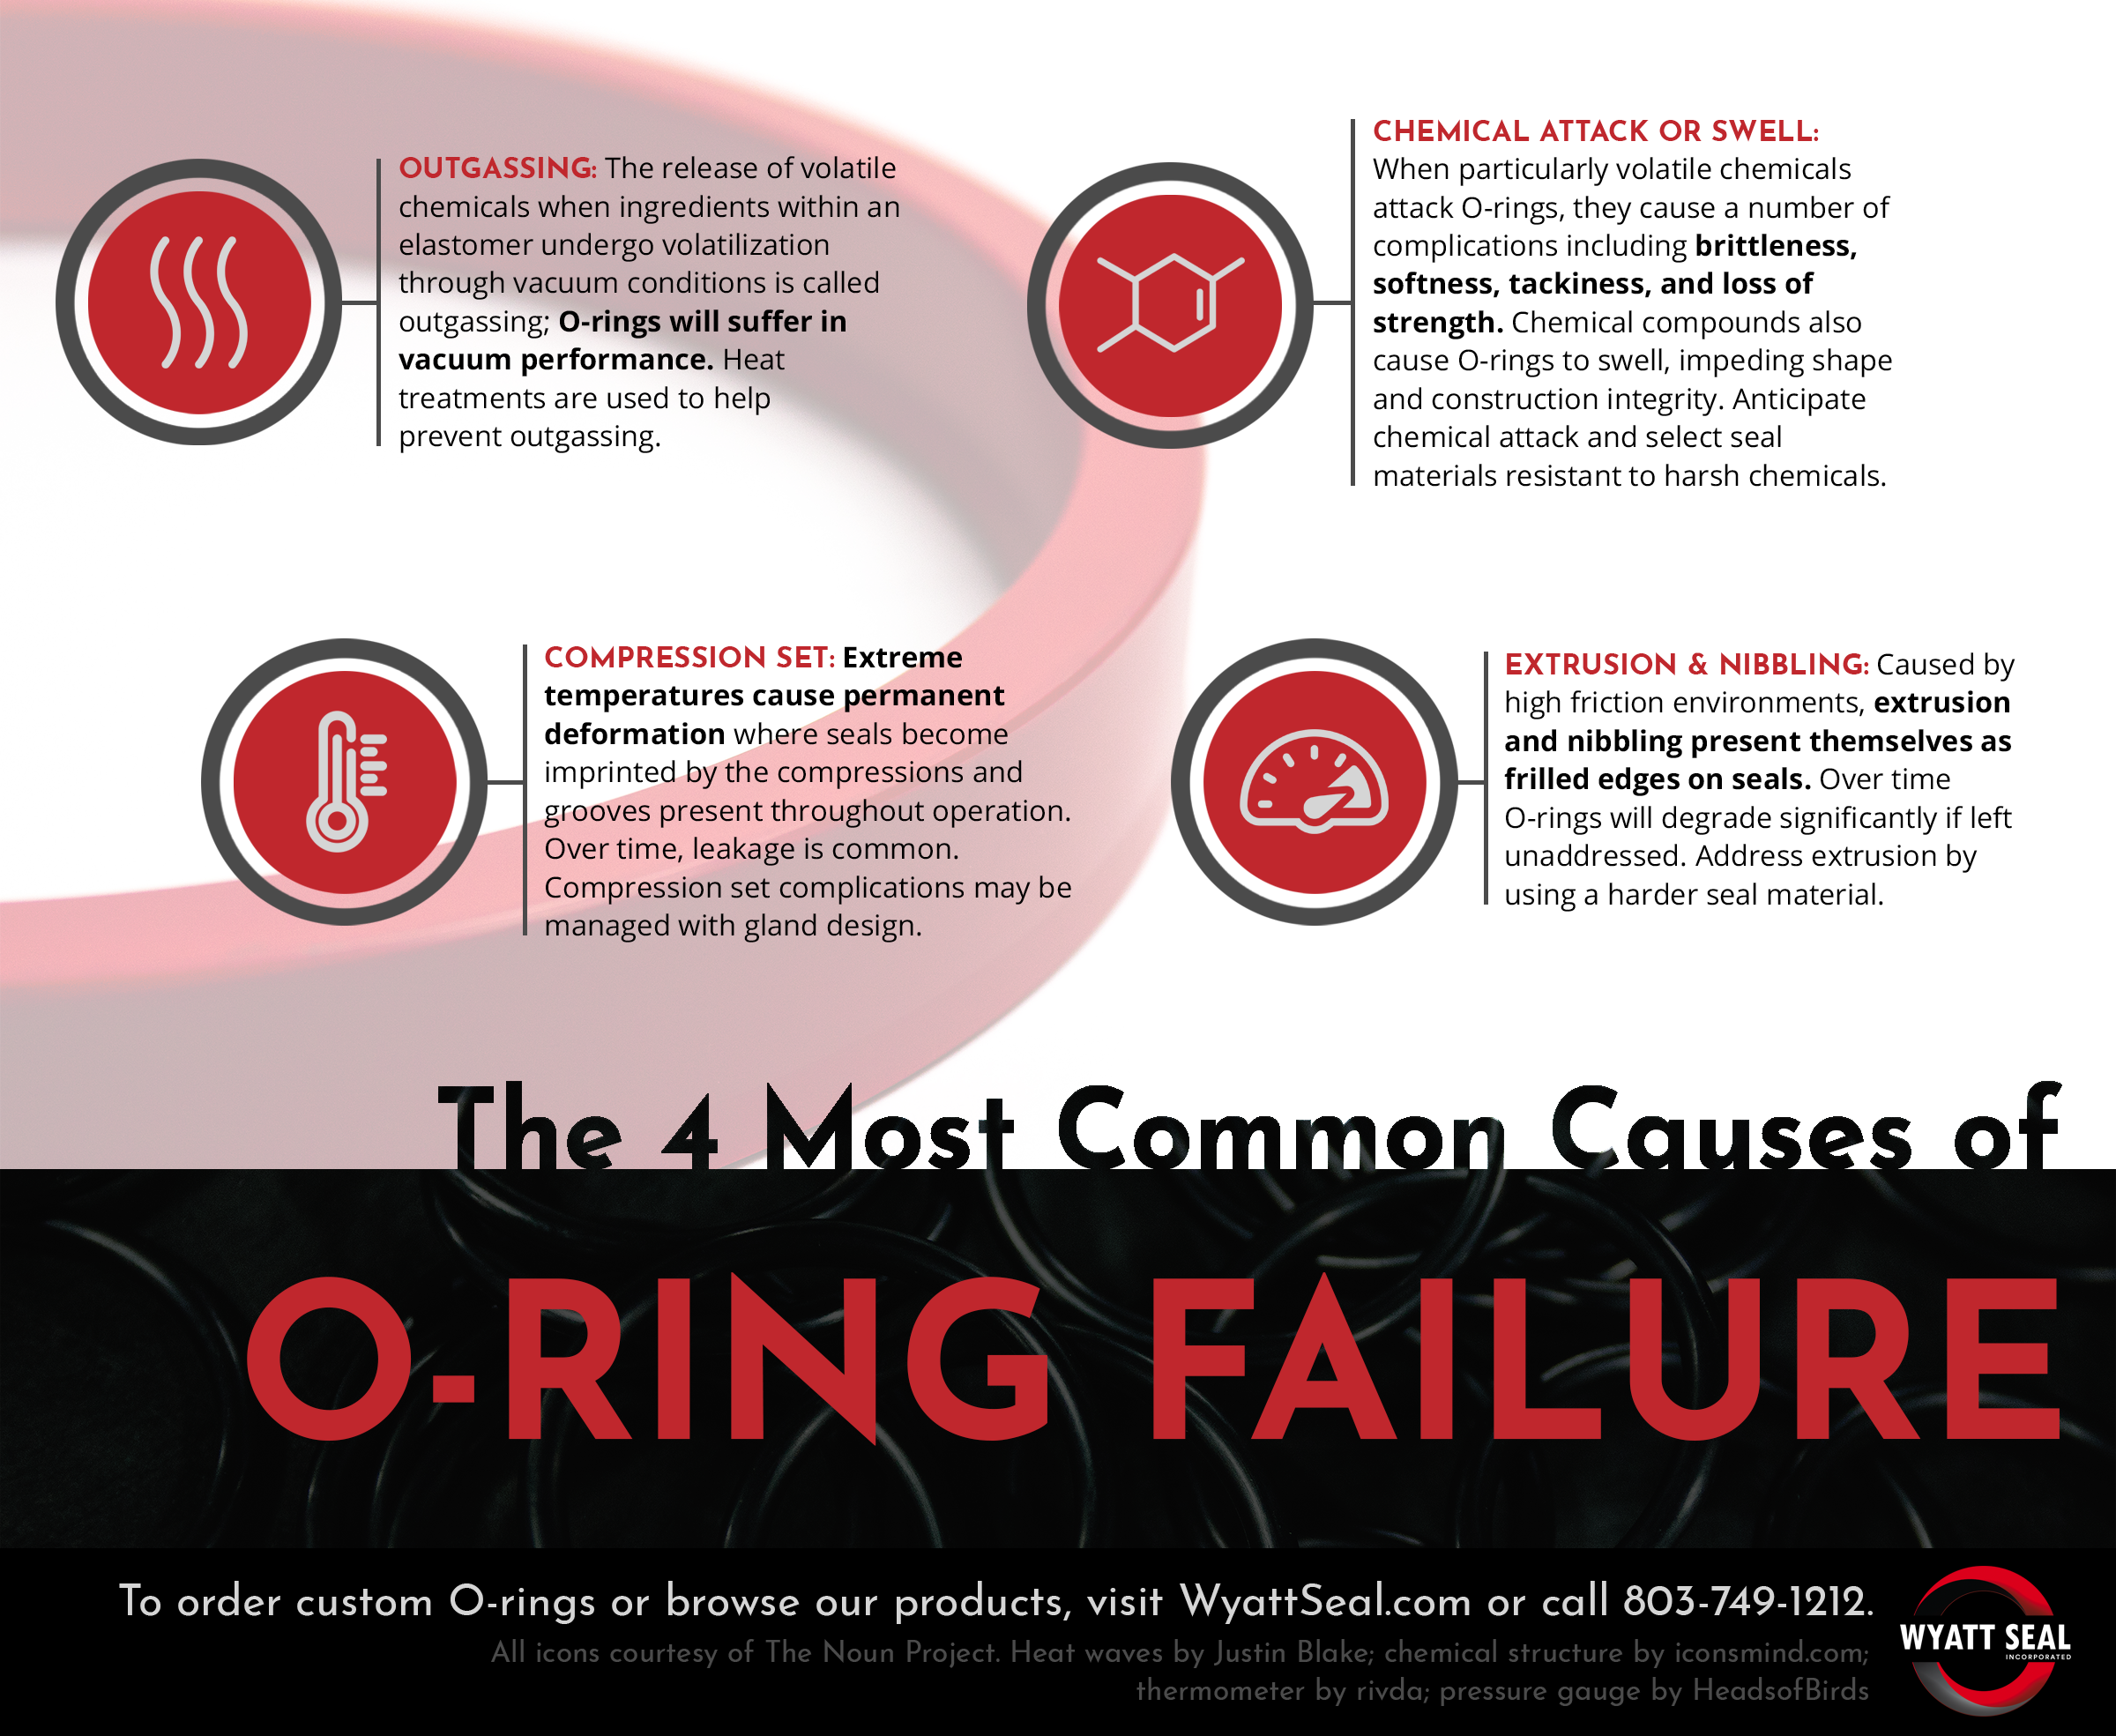 (Wyatt Seal) The 4 Most Common Causes of O-Ring Failure.png